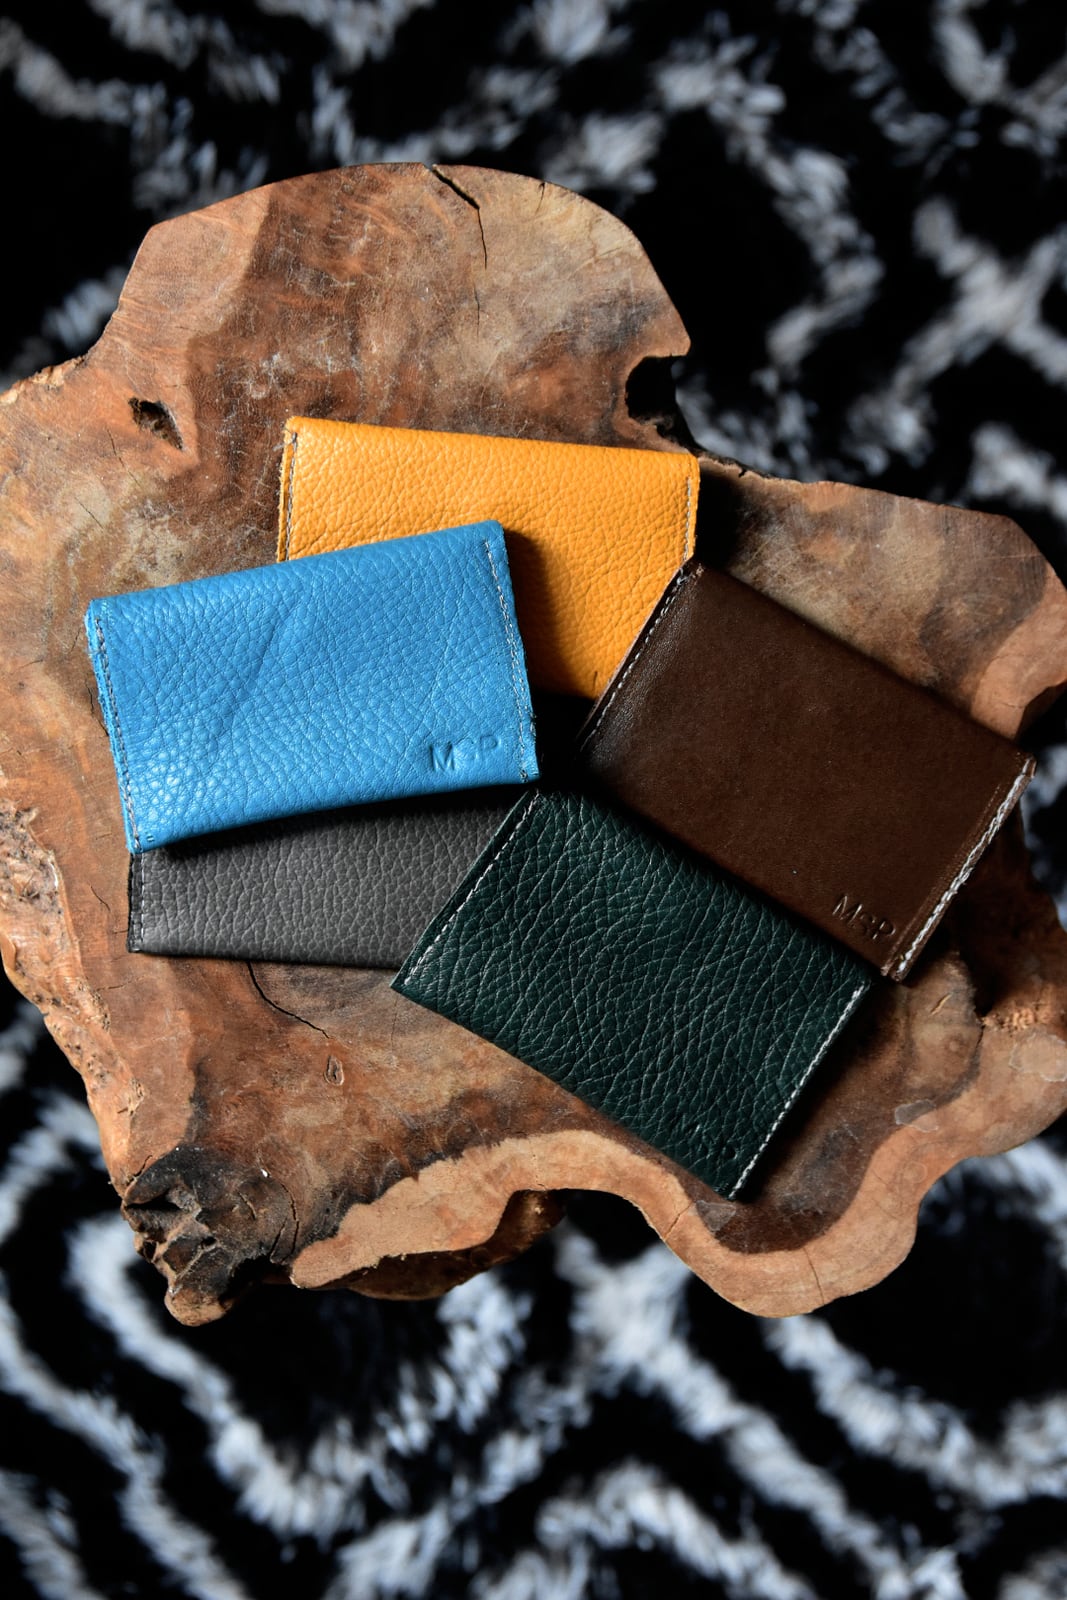 Limited Edition Card Holder Handcrafted From Premium Italian 